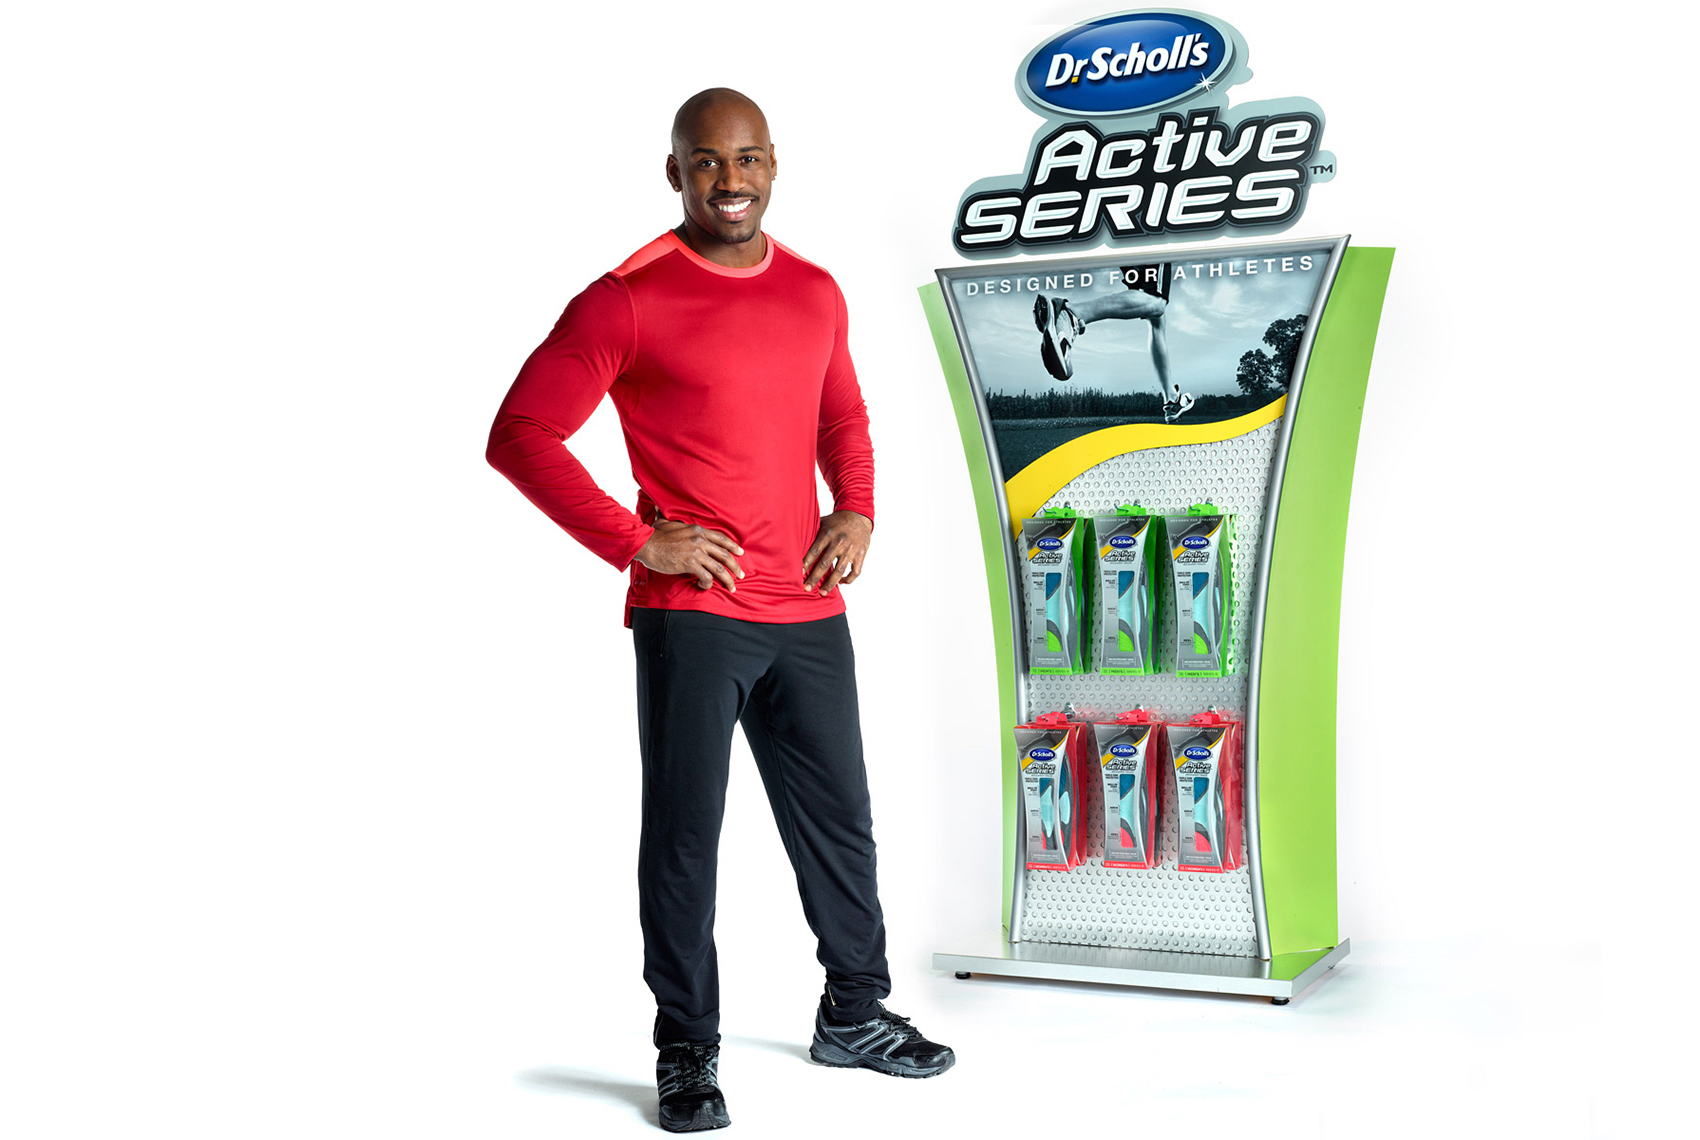 Dolvett Quince stands next to Dr. Scholl